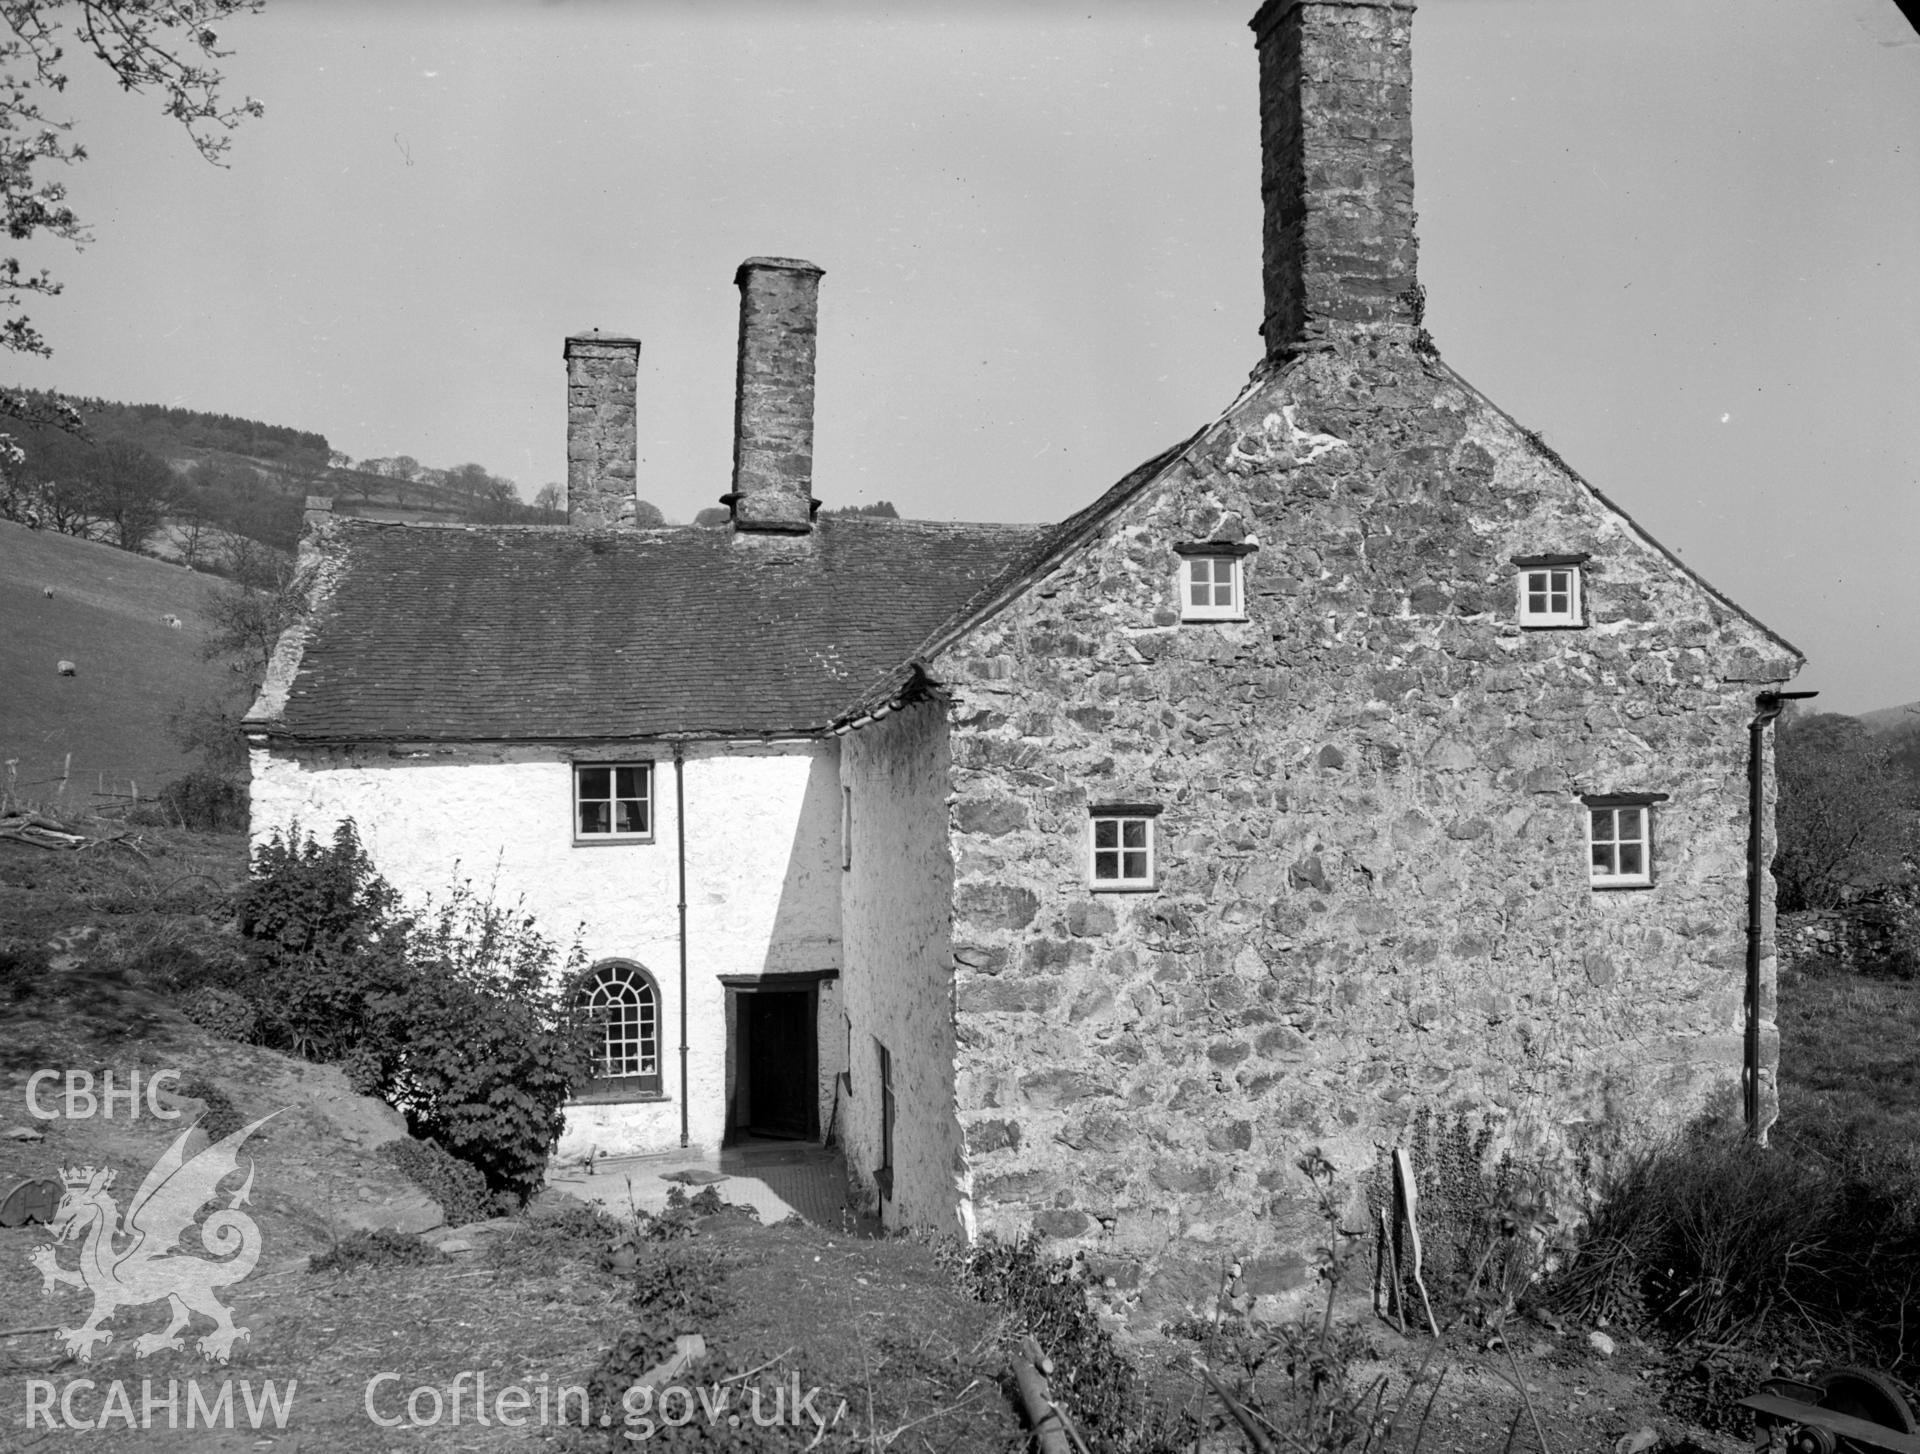 A view of Plas Llan's leaning chimney. Also visible is a an arched window next to the south door.